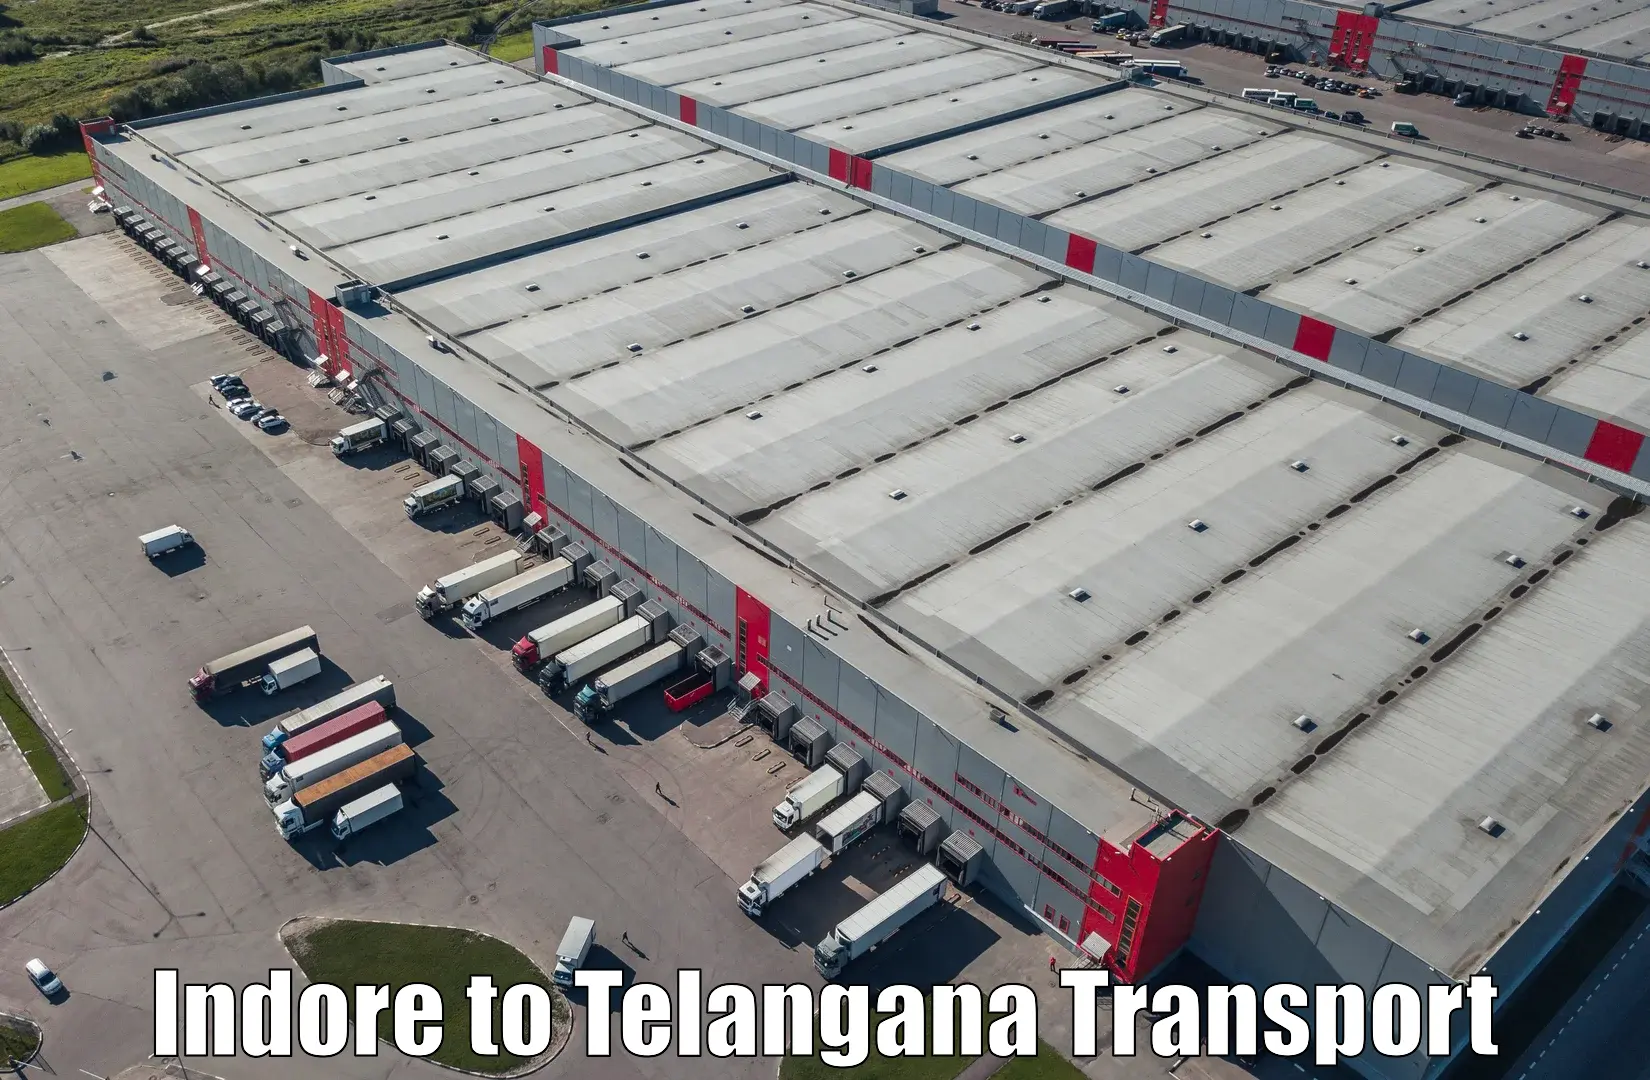 Shipping services in Indore to Gangadhara